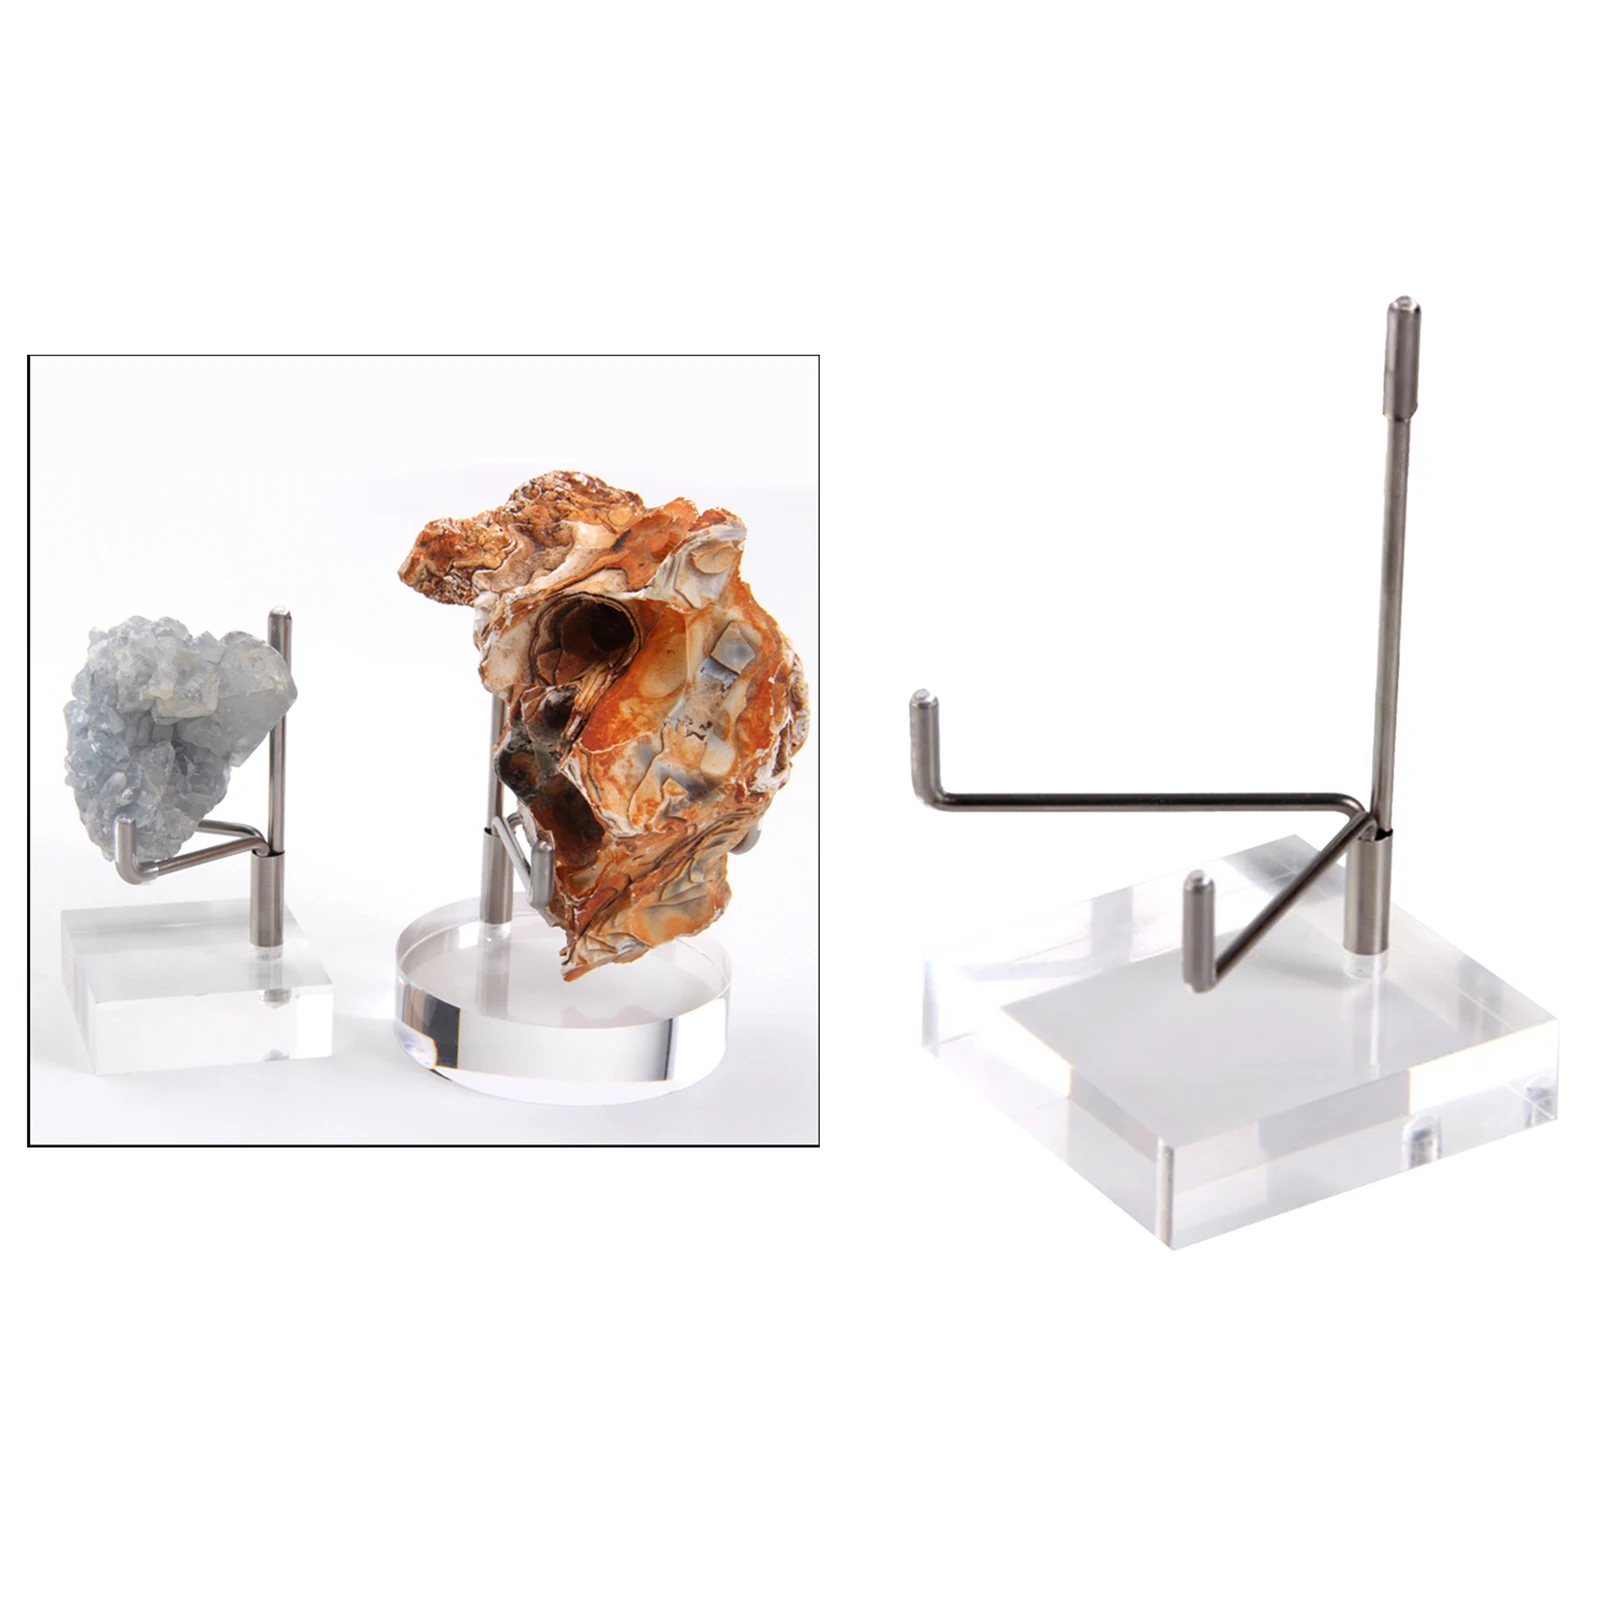 Acrylic Display Stand Metal Arm Holder Suport Square Base for Fossils Minerals Rocks Crystal Ball Collectibles Home Office Decor